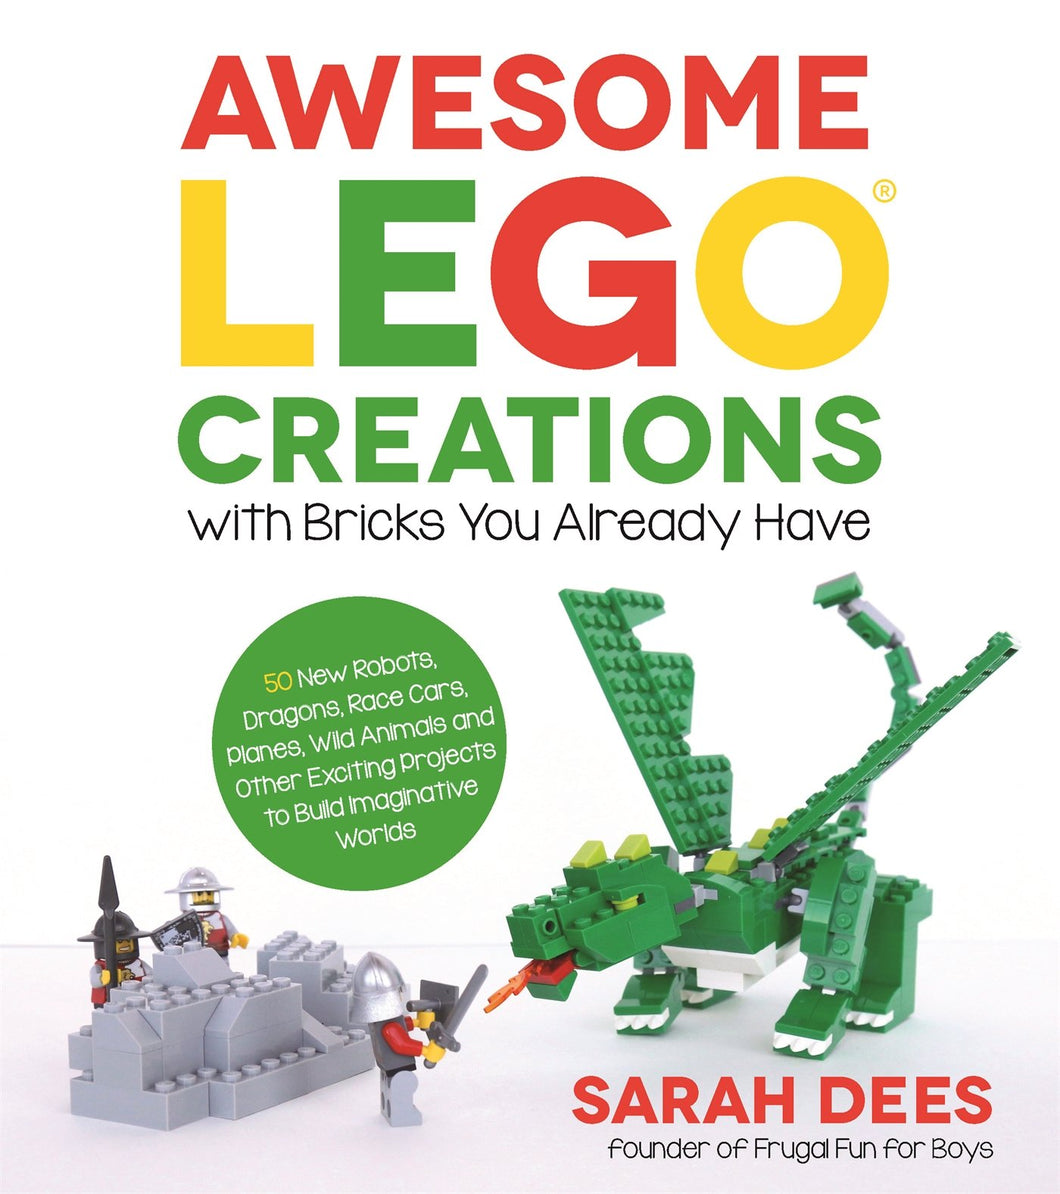 Awesome LEGO® Creations with Bricks You Already Have